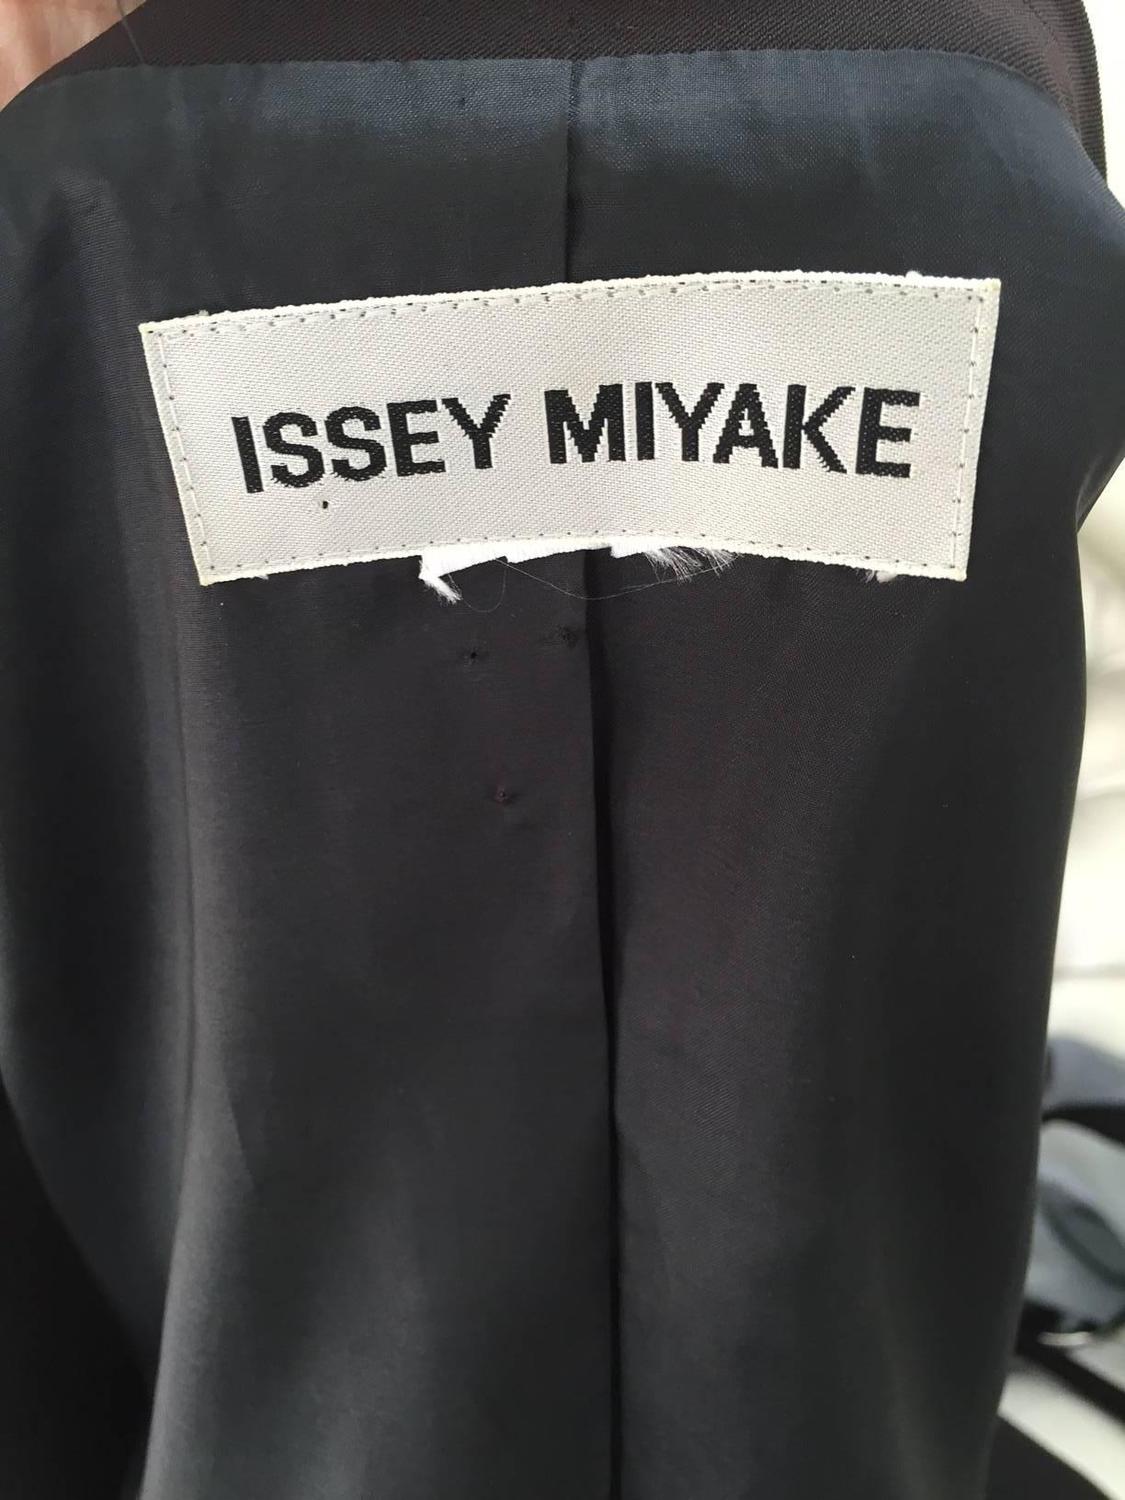 90s ISSEY MIYAKE jacket For Sale at 1stdibs